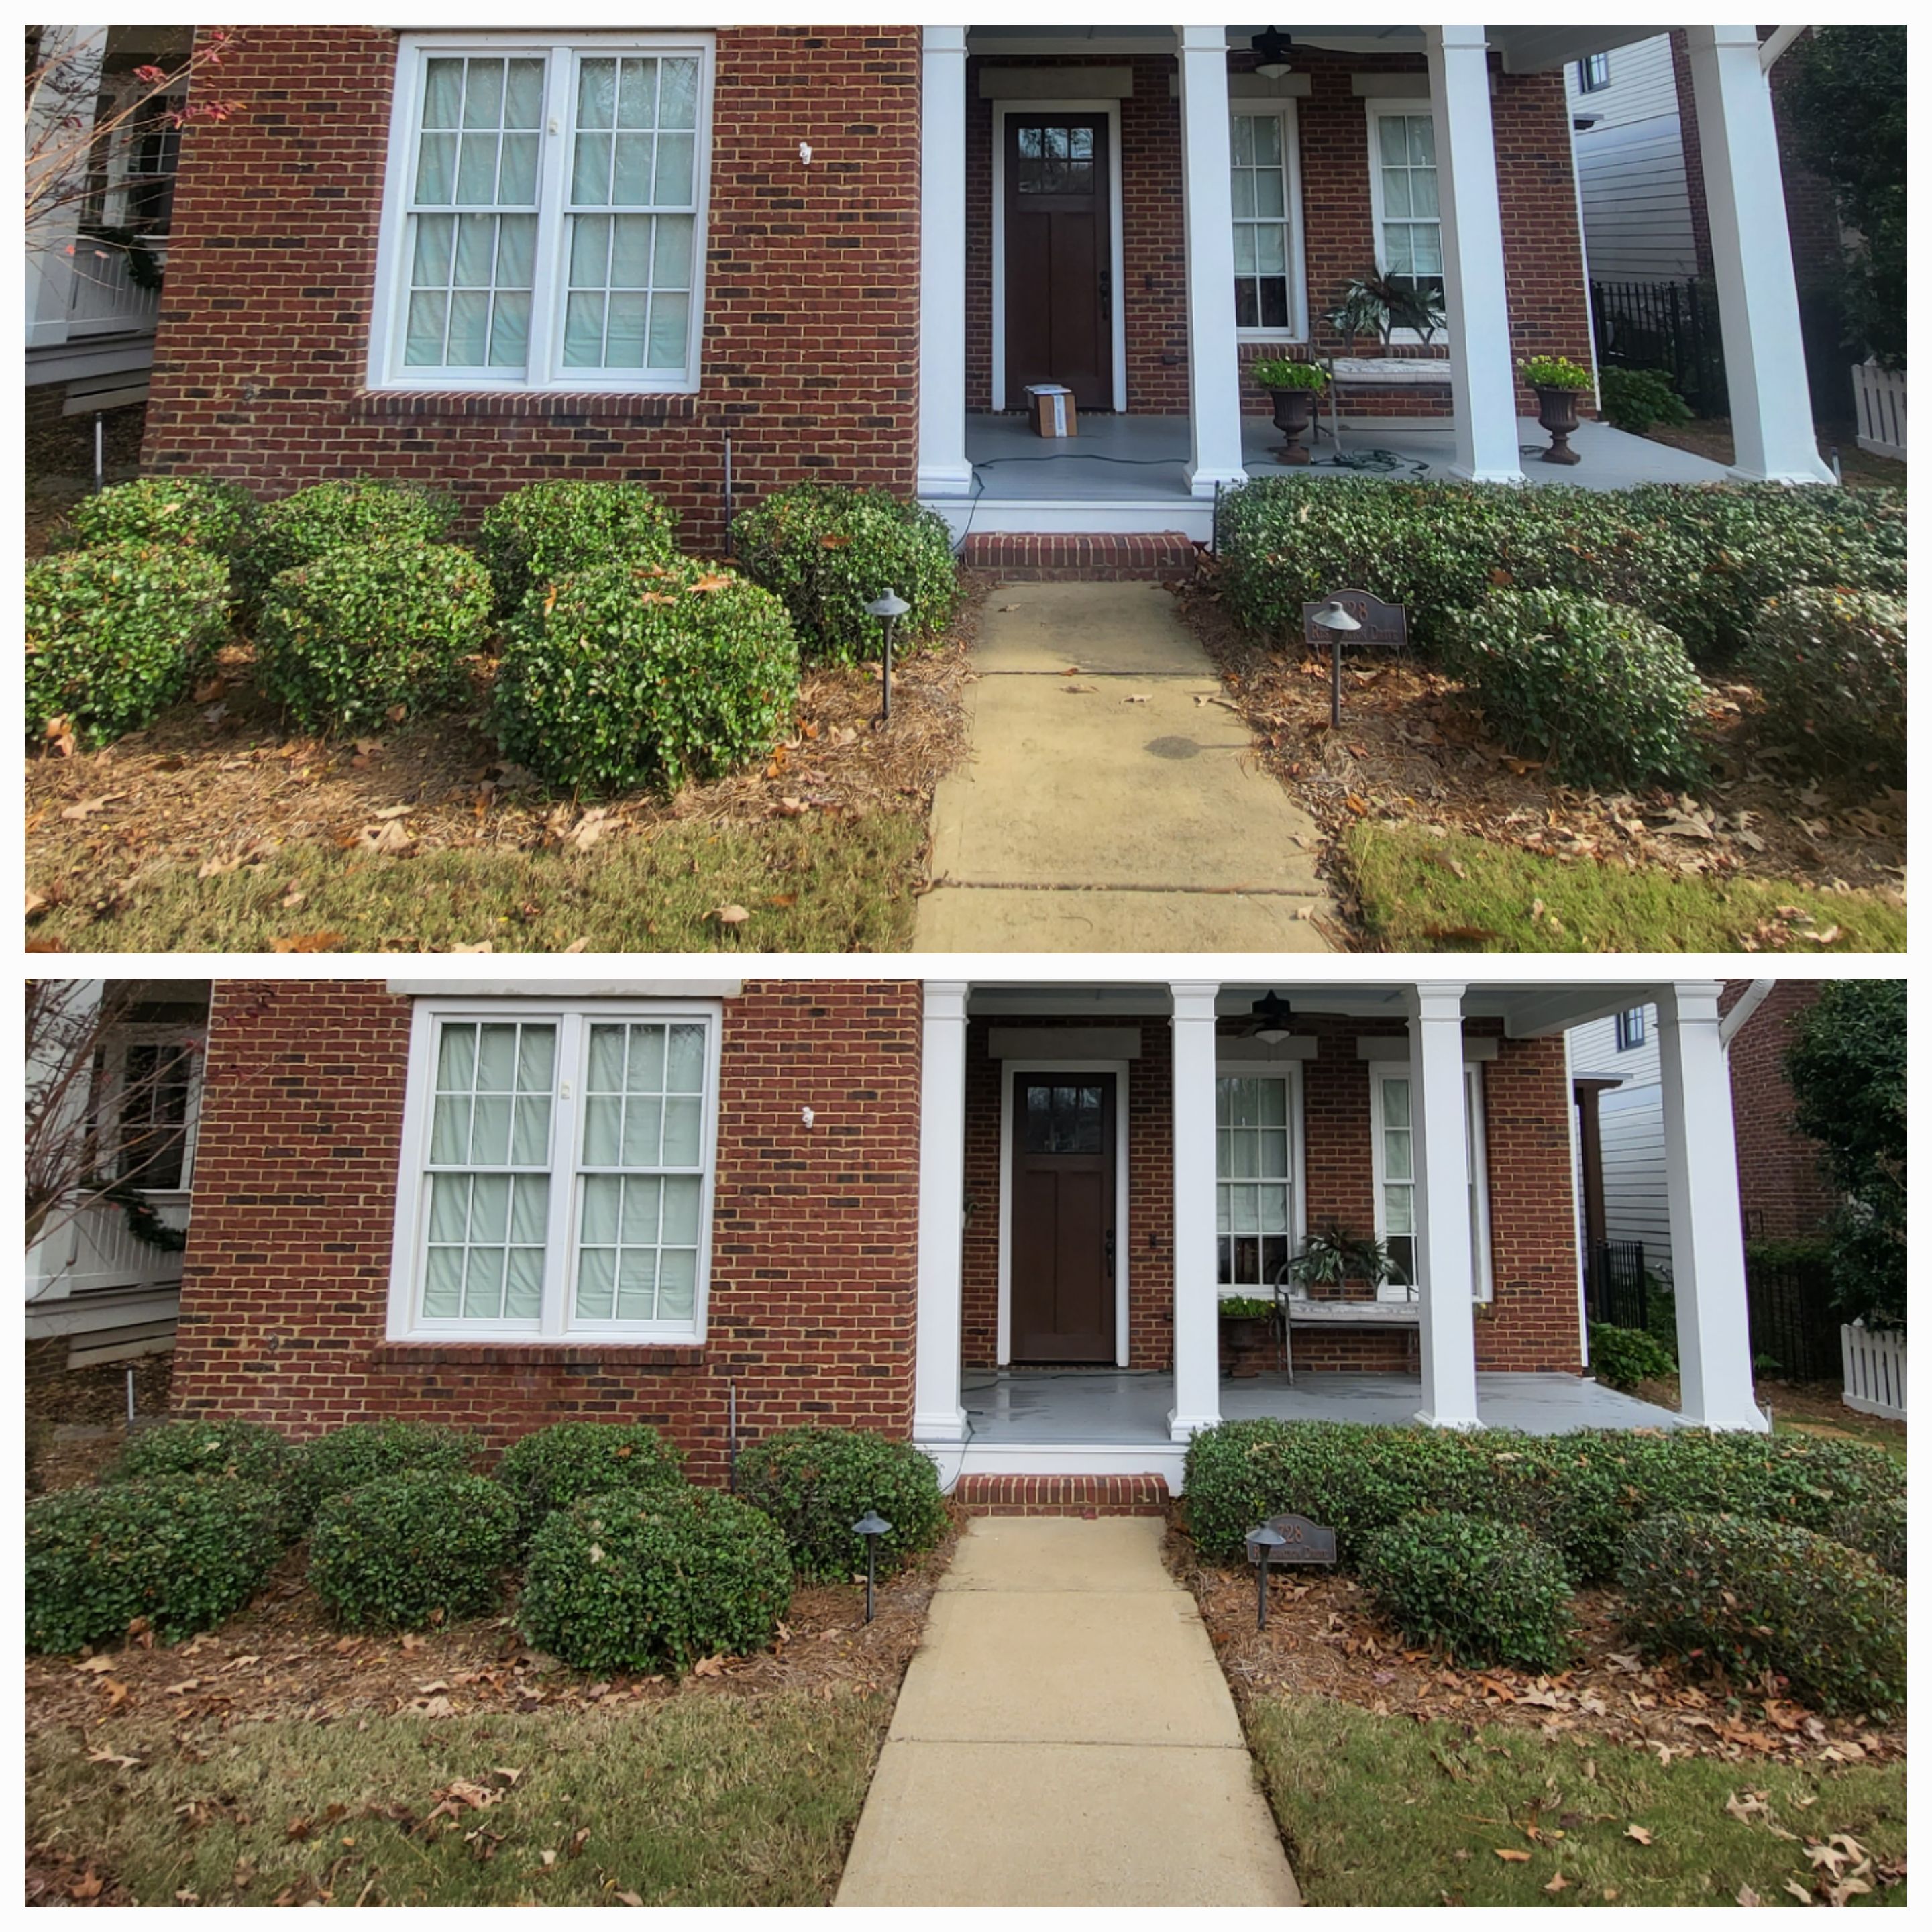 Professional Window Cleaning, Concrete Cleaning, & Sand-Packed Stone Patio Cleaning In Hoover, AL